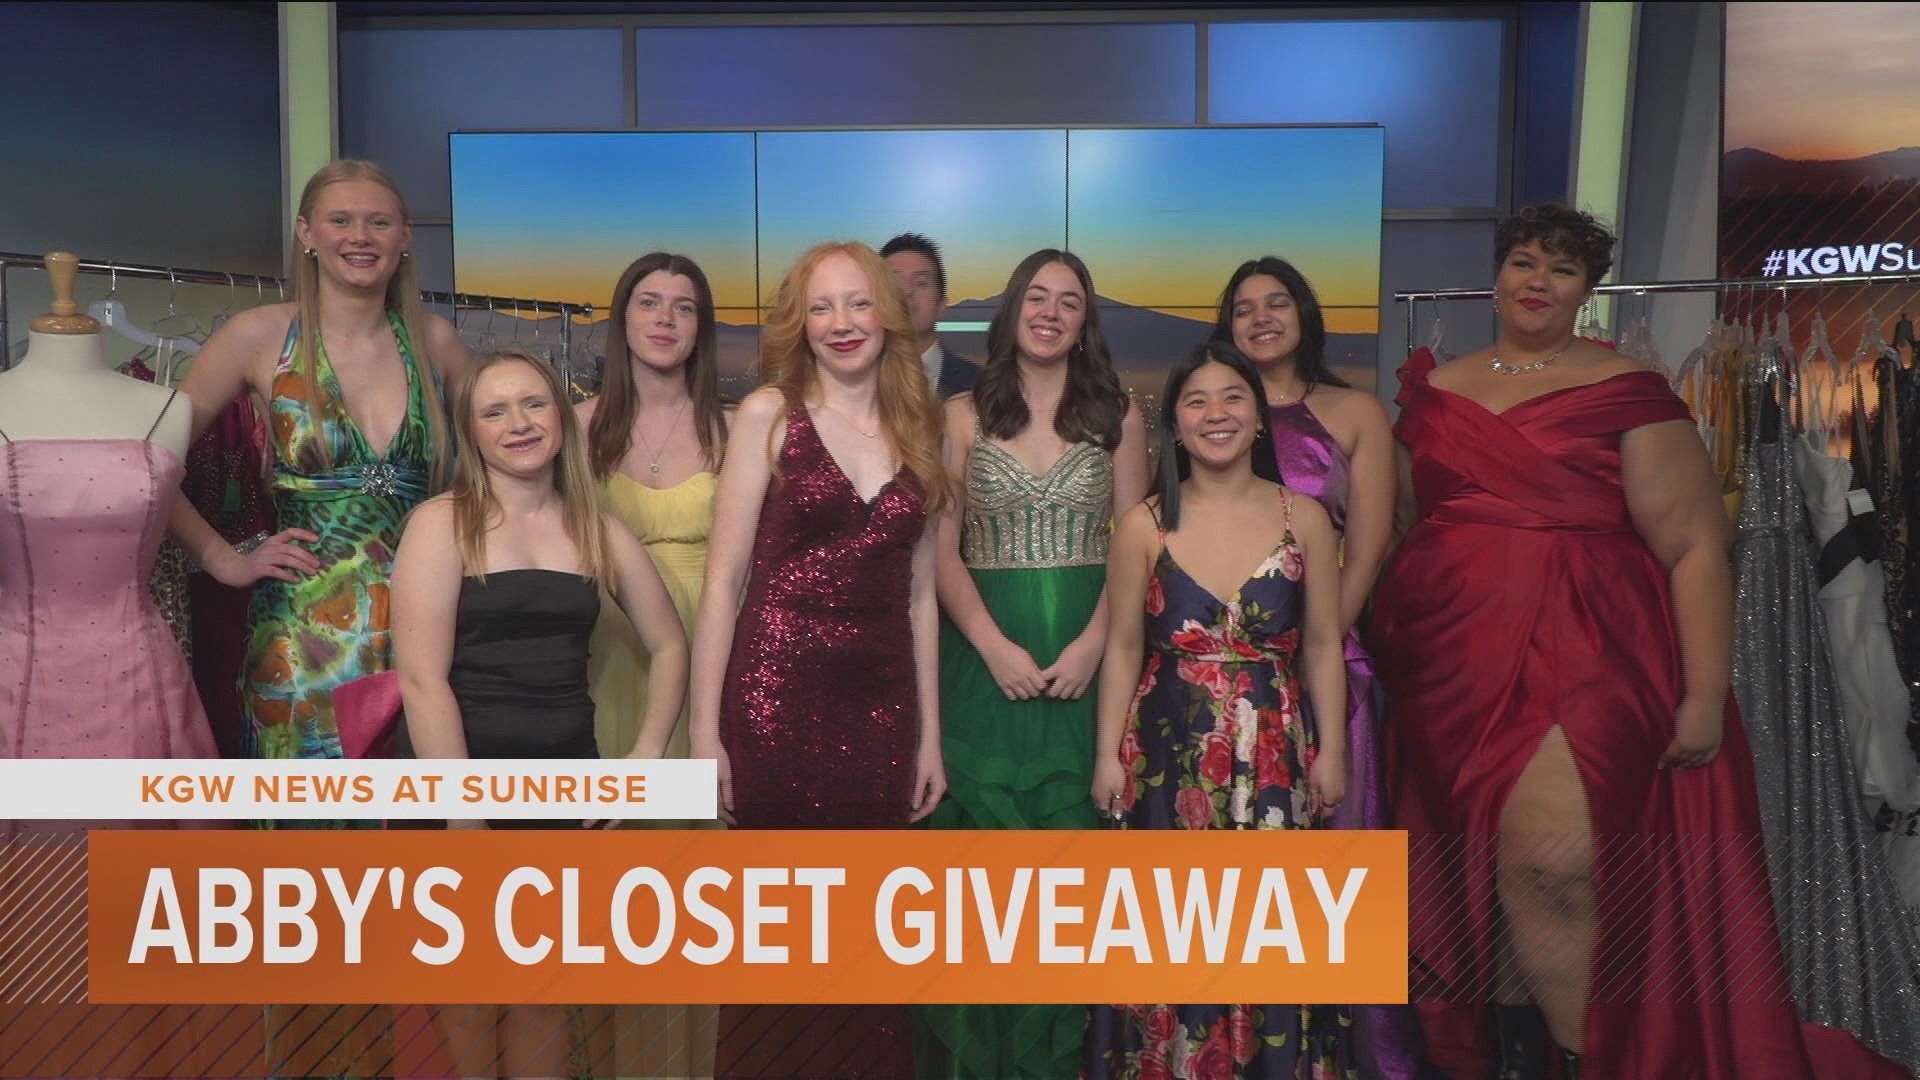 Abby's Closet is a non-profit that has been providing high school students with free prom dresses for 20 years! To participate, register online at AbbysCloset.org